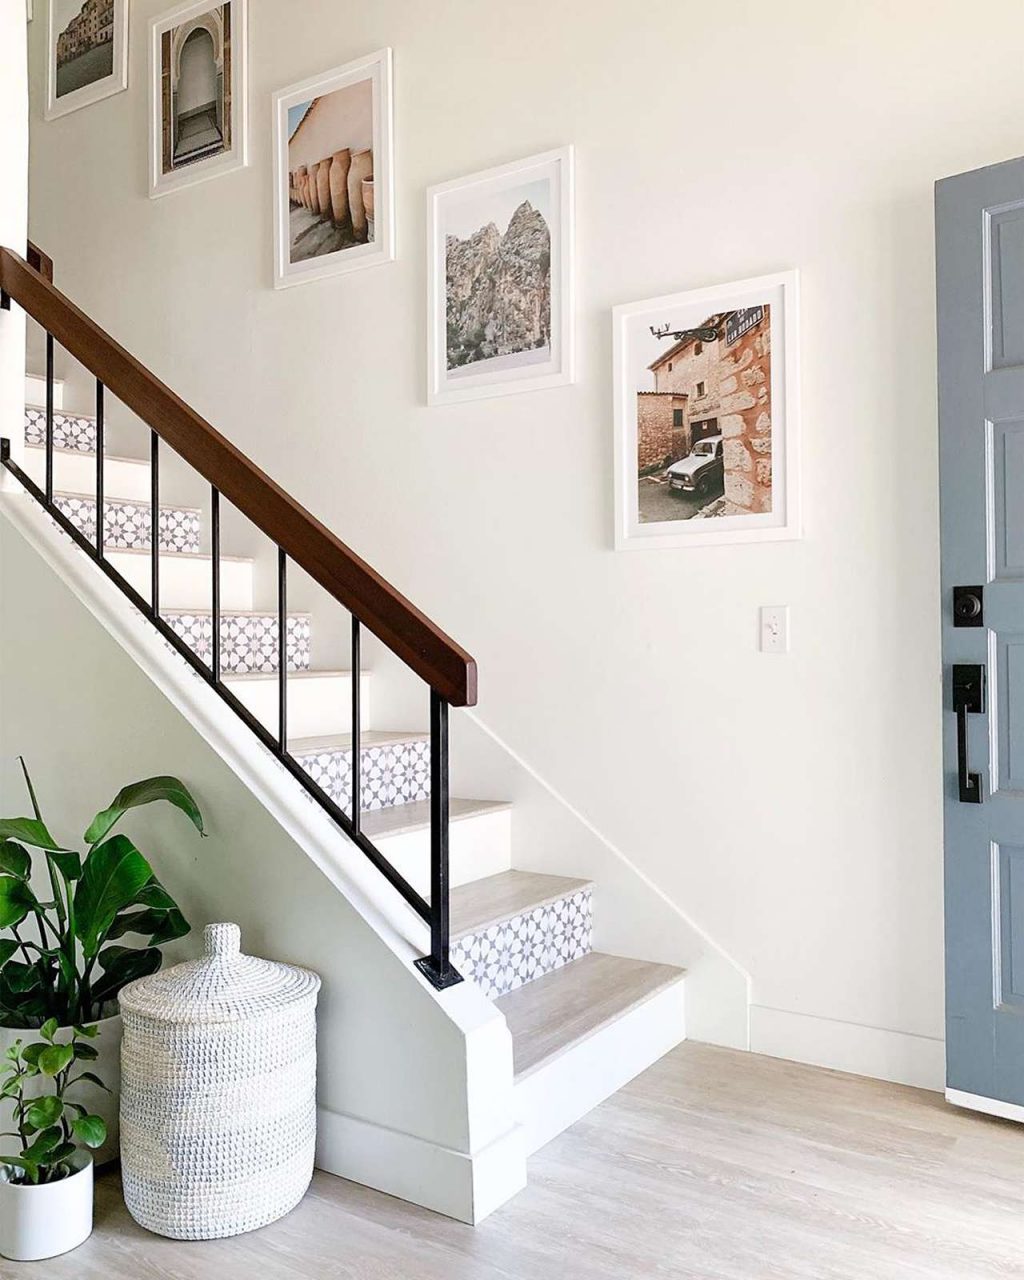 White picture frames on wall with staircase